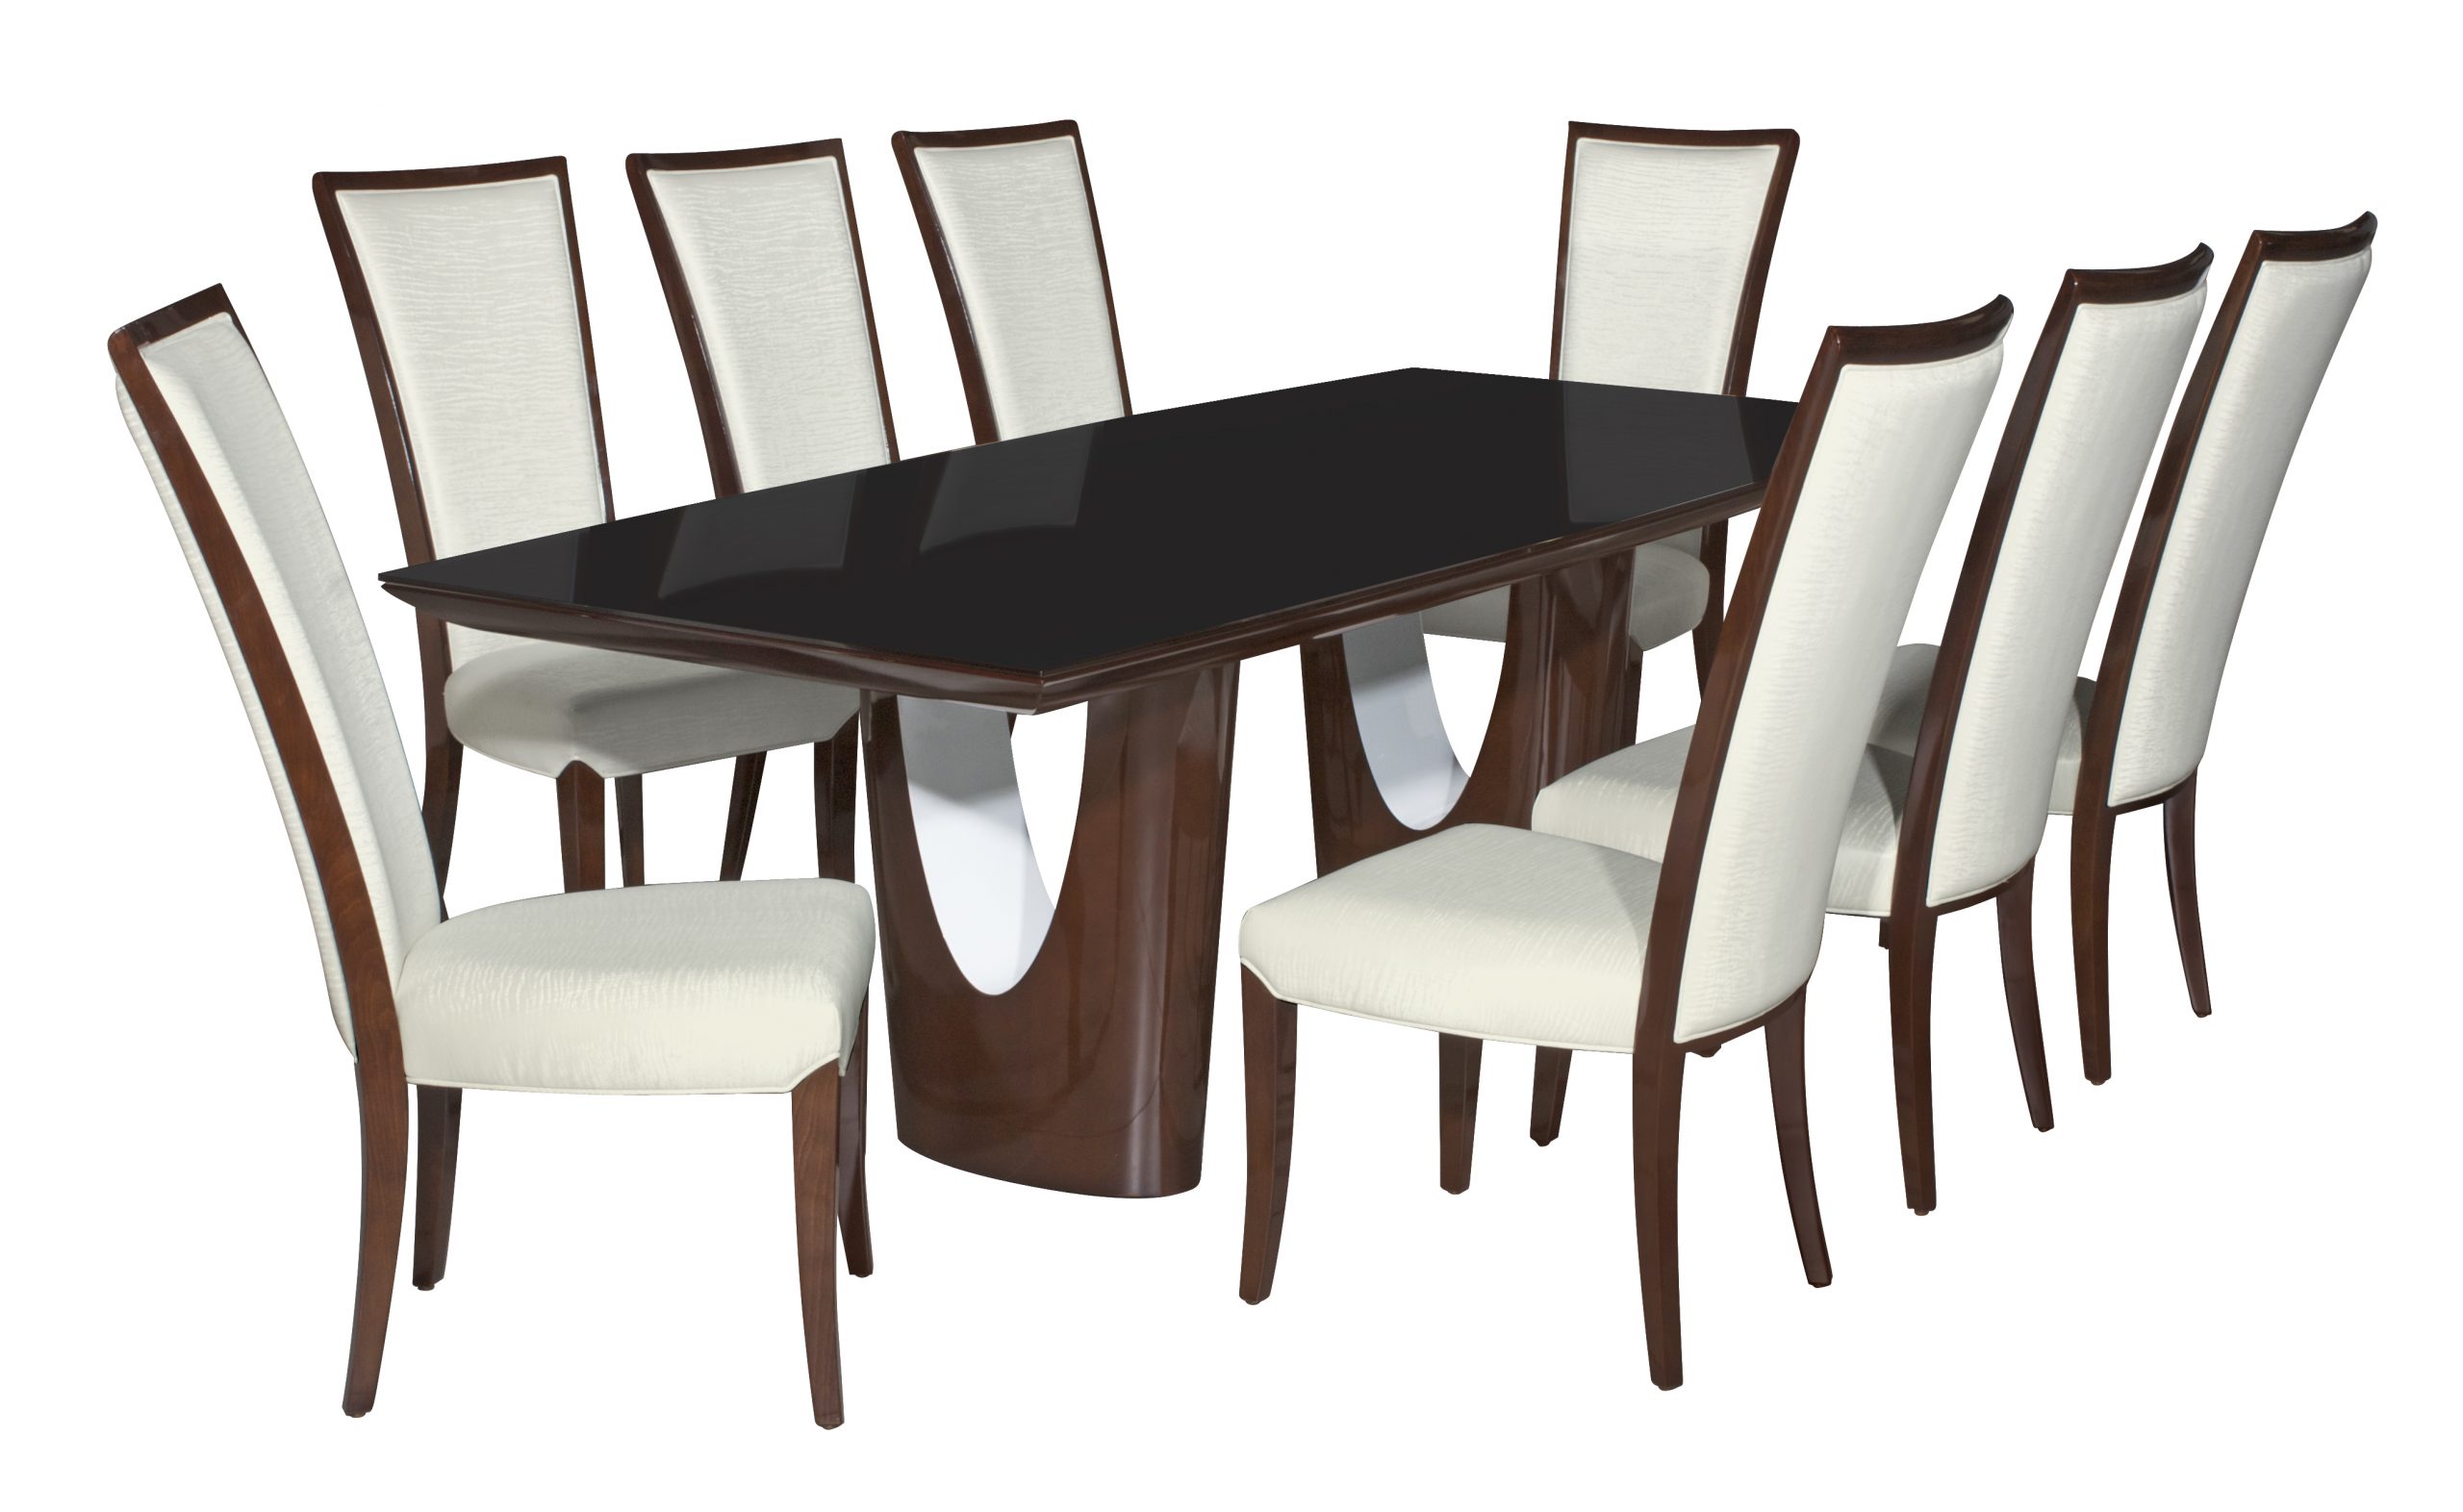 Seranto Dining Room Suite United Furniture Outlets in sizing 4134 X 2538